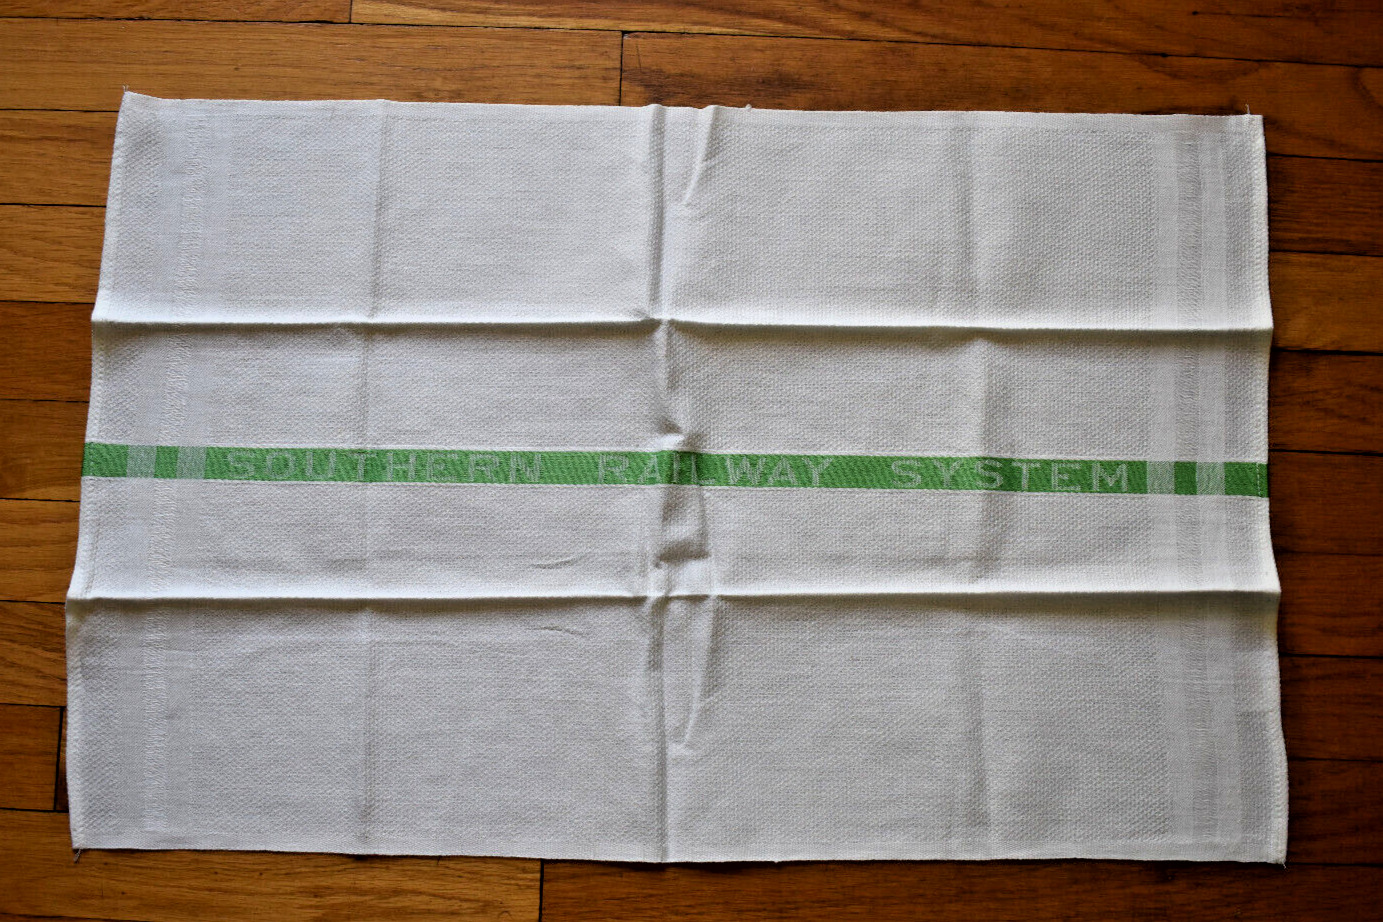 VINTAGE SOUTHERN RAILWAY SYSTEM  RAILROAD PASSENGER COTTON HAND TOWEL BY DUNDEE